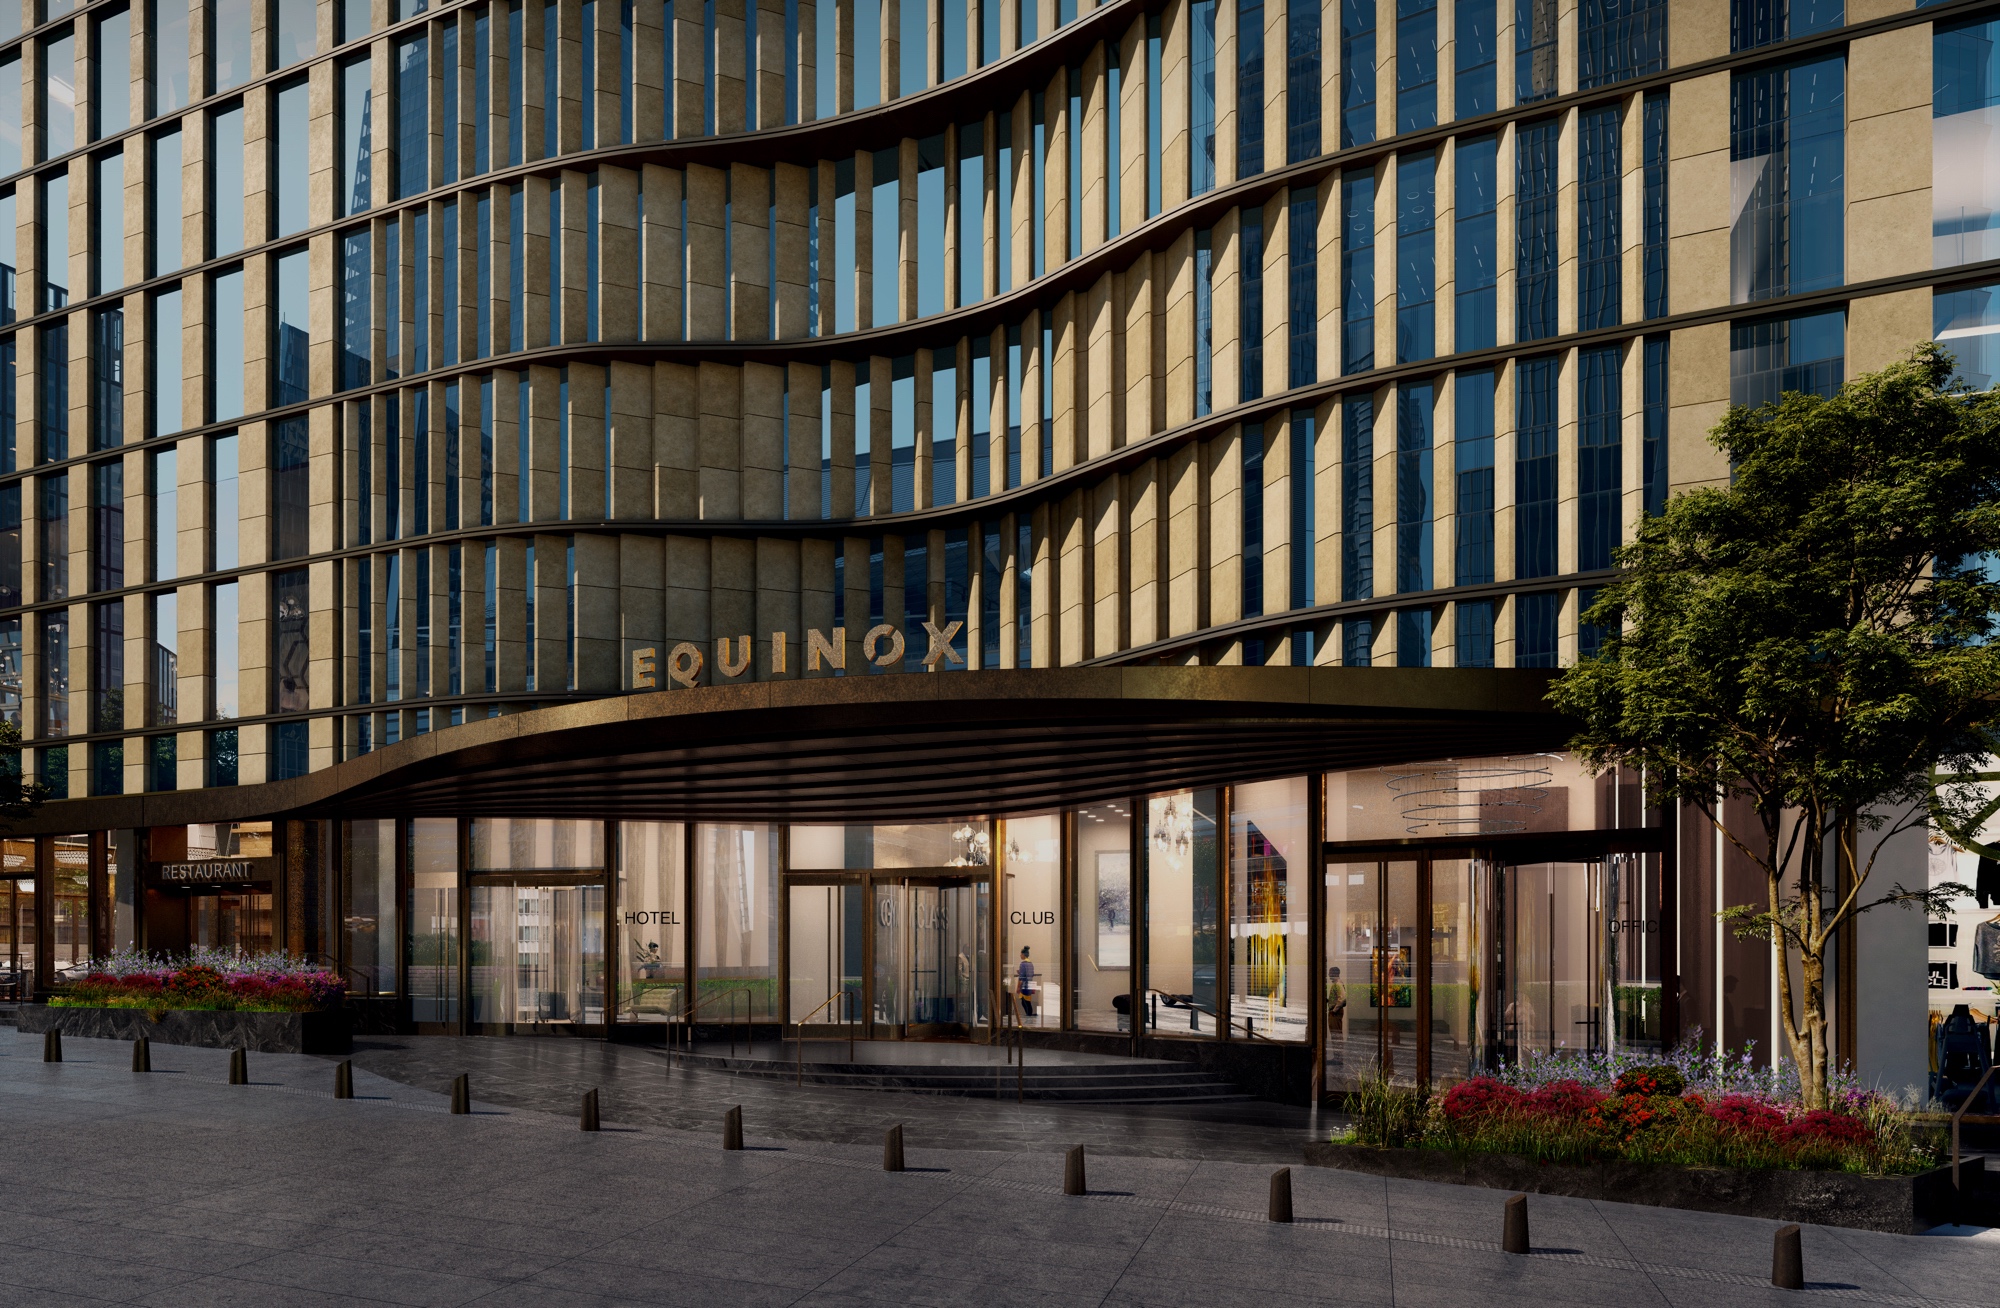 general manager equinox hotel nyc